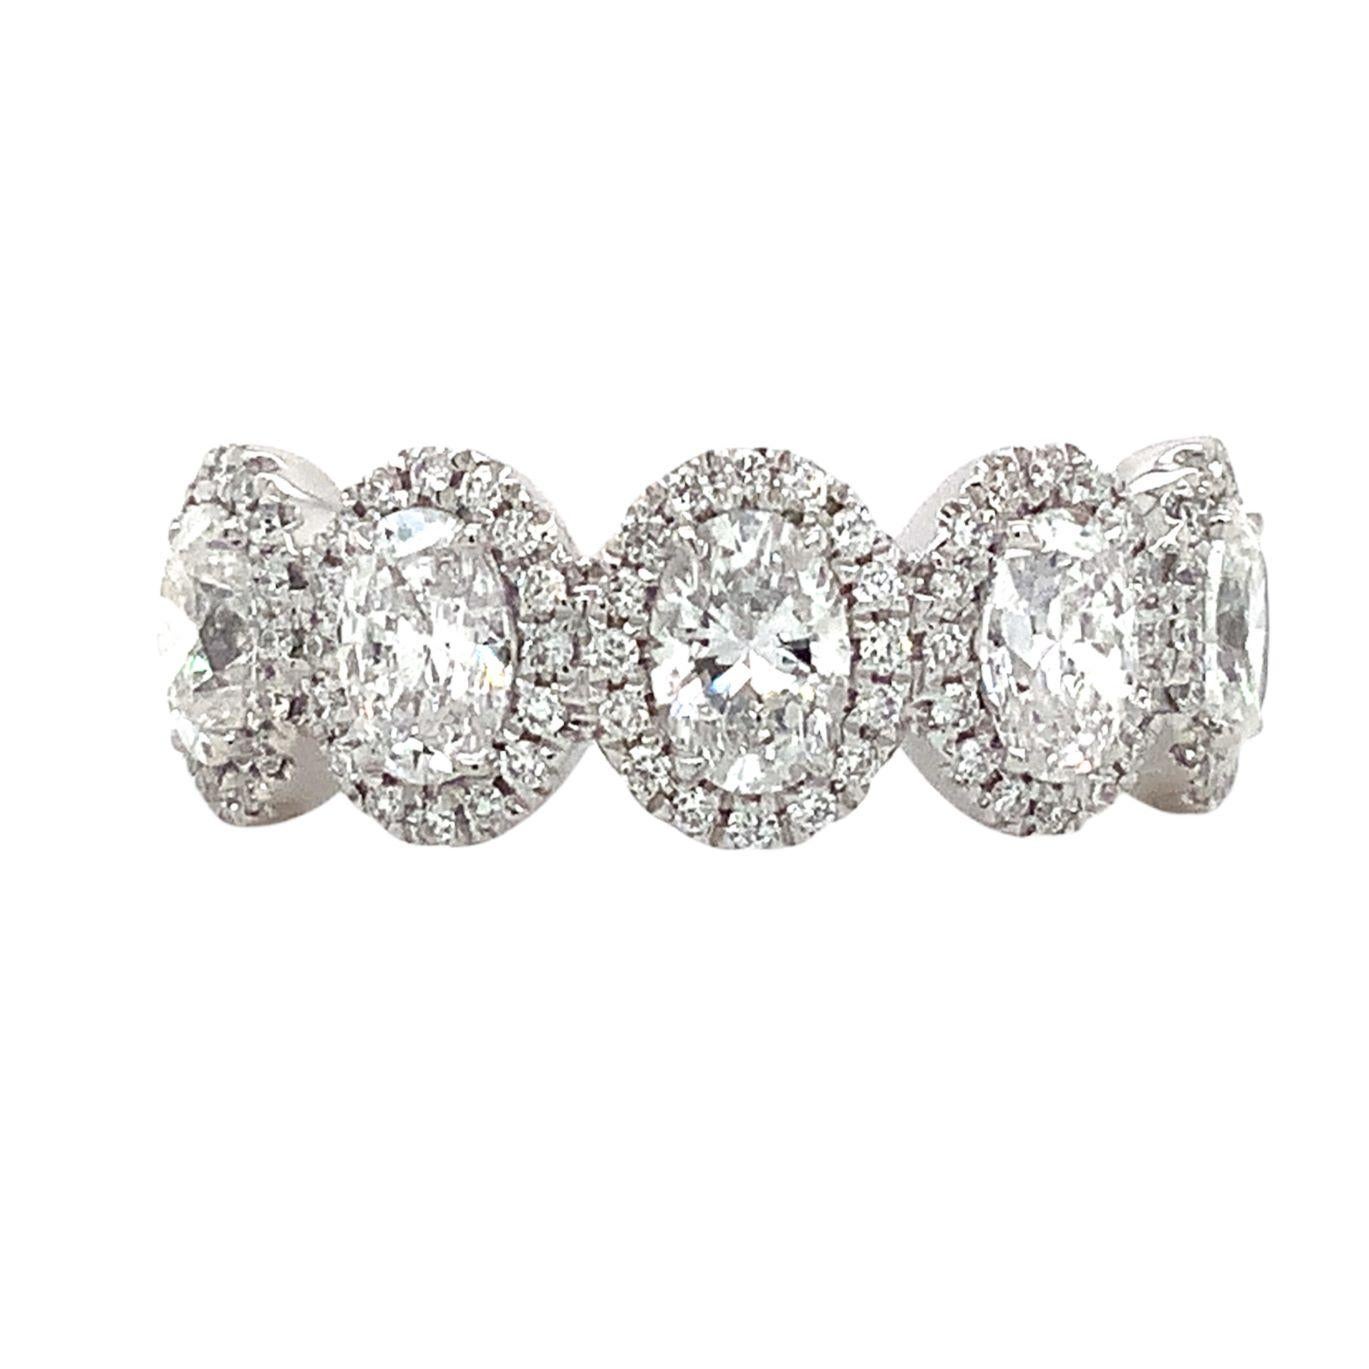  

Roman + Jules 5 Stone Oval Diamond Halo Band set in Platinum totals 1.77 cts t.w. Perfect for stacking, anniversaries, or as a right-hand ring, this piece makes a sophisticated, yet feminine statement. Five oval diamonds weighing 1.50 cts t.w.